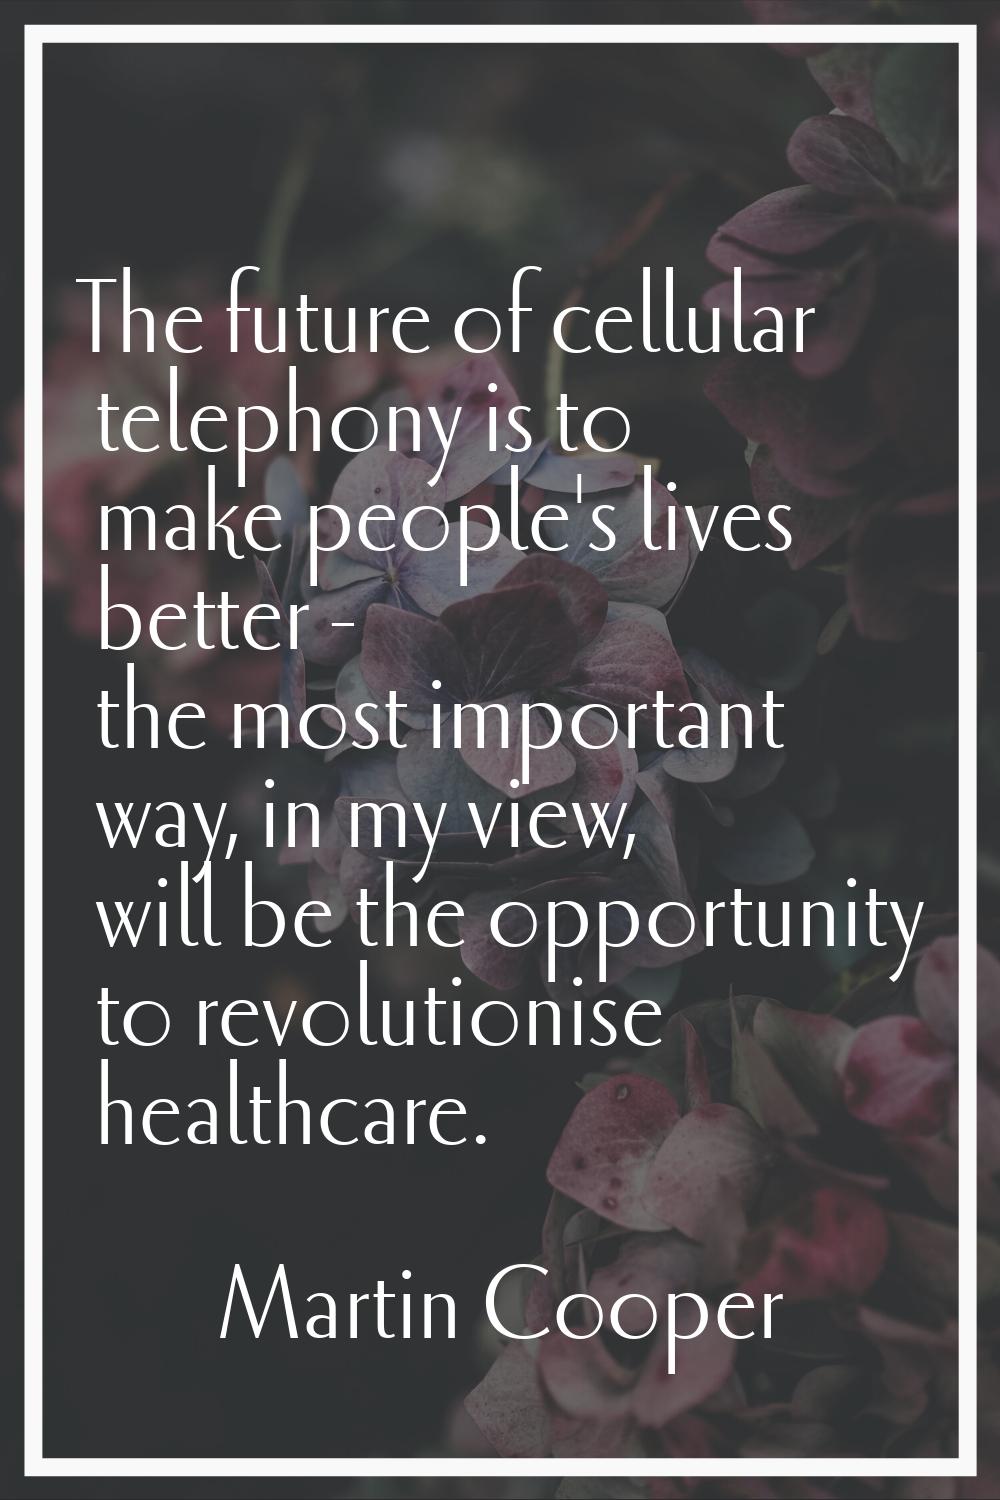 The future of cellular telephony is to make people's lives better - the most important way, in my v